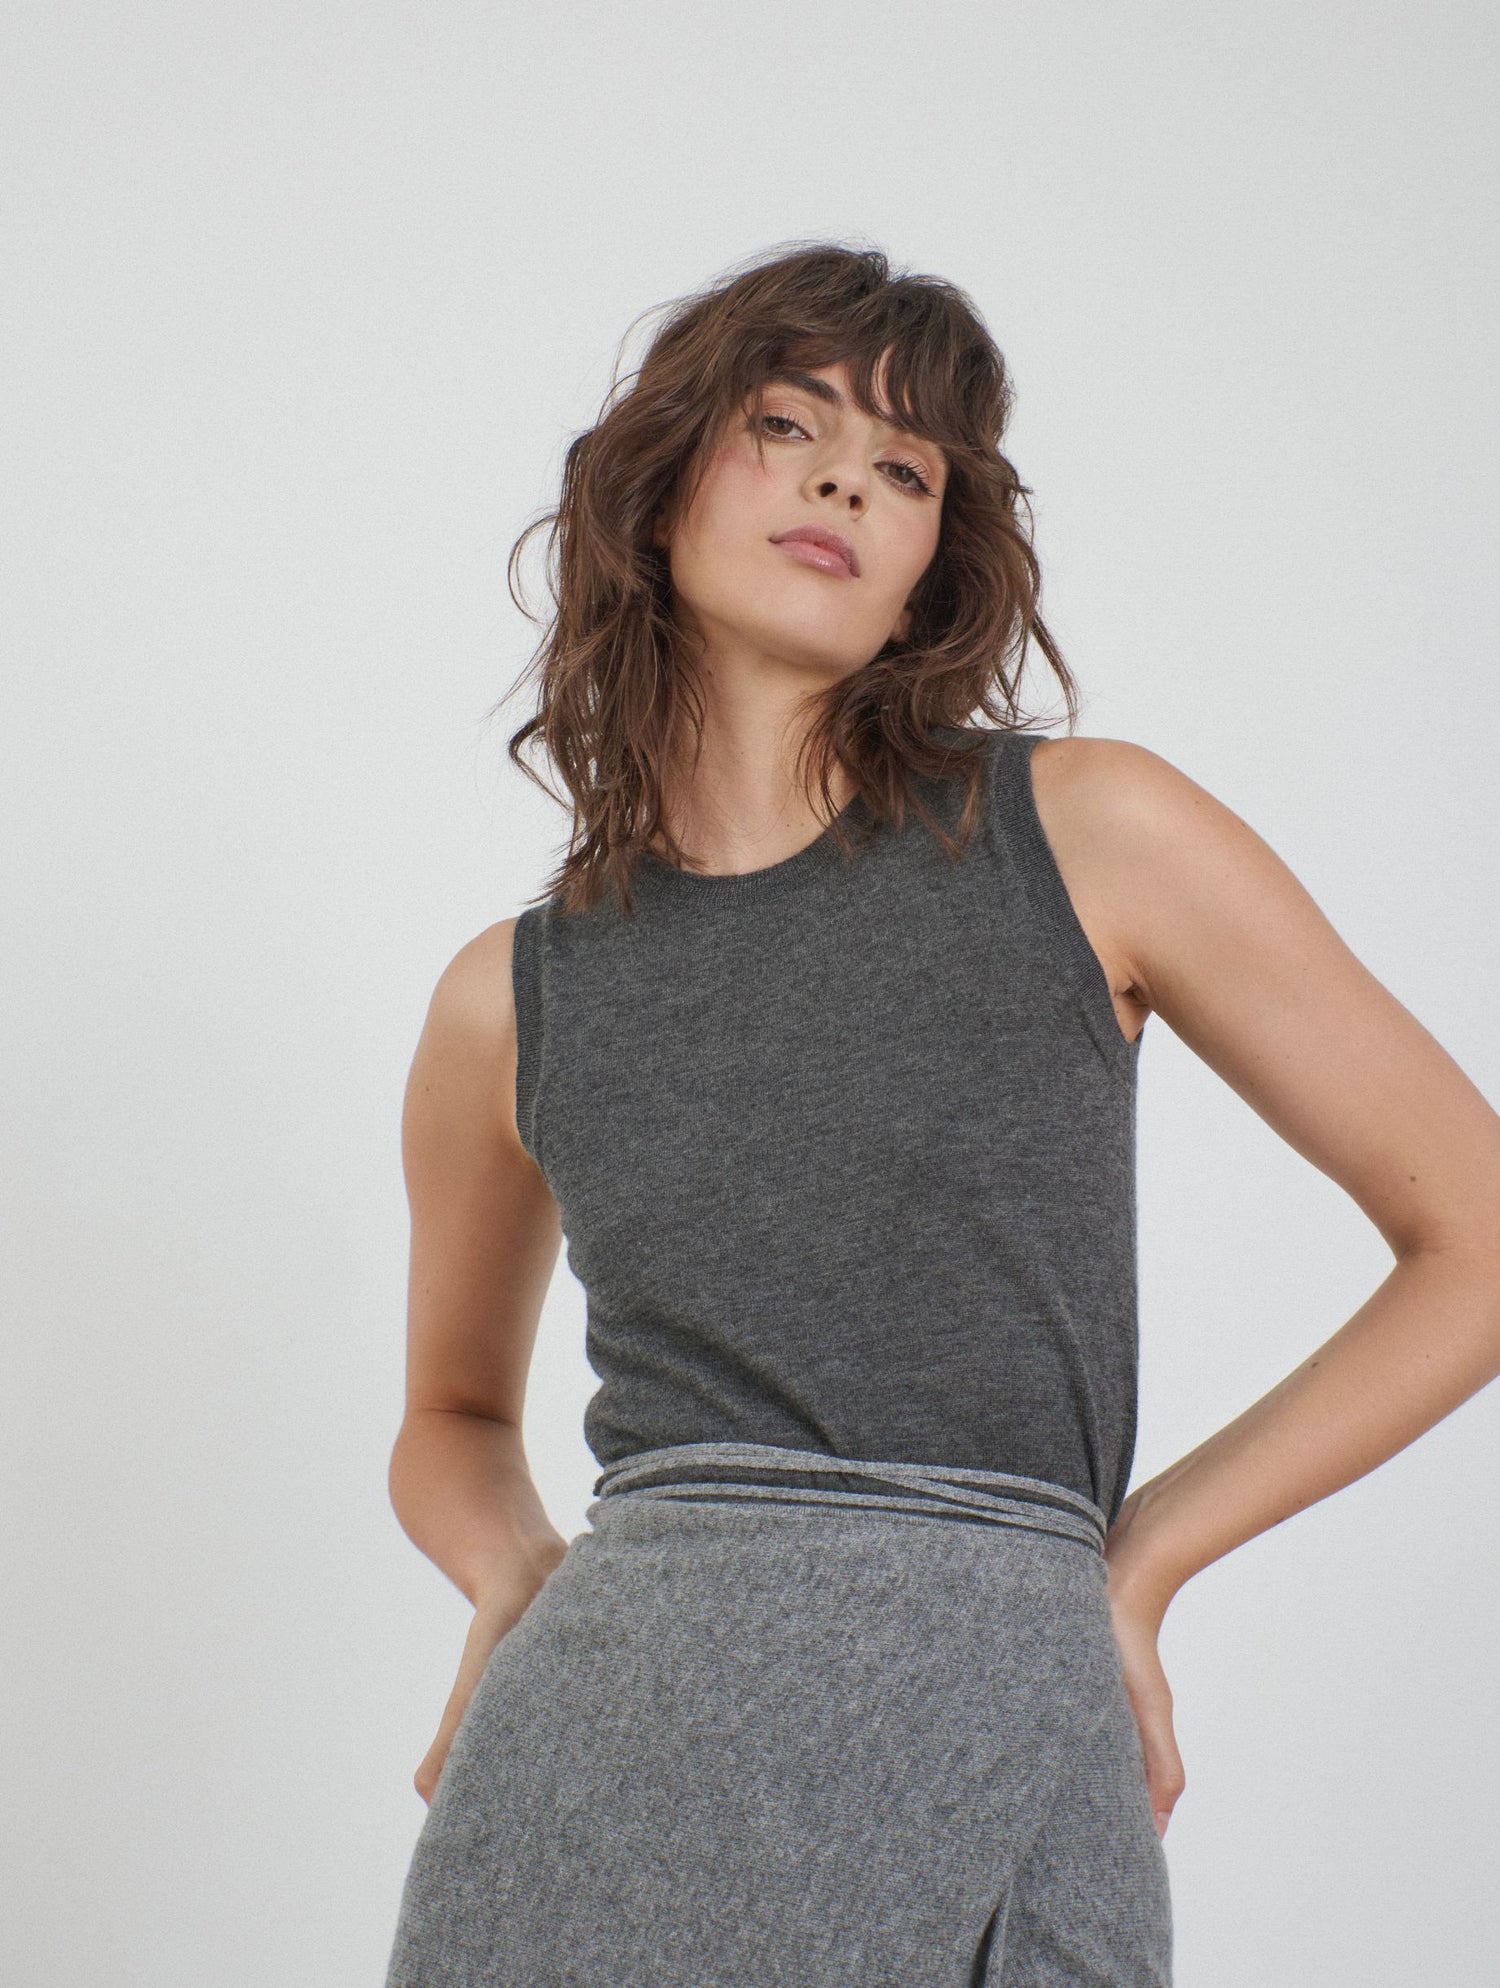 Cashmere Knitted Sleeveless Top Grey